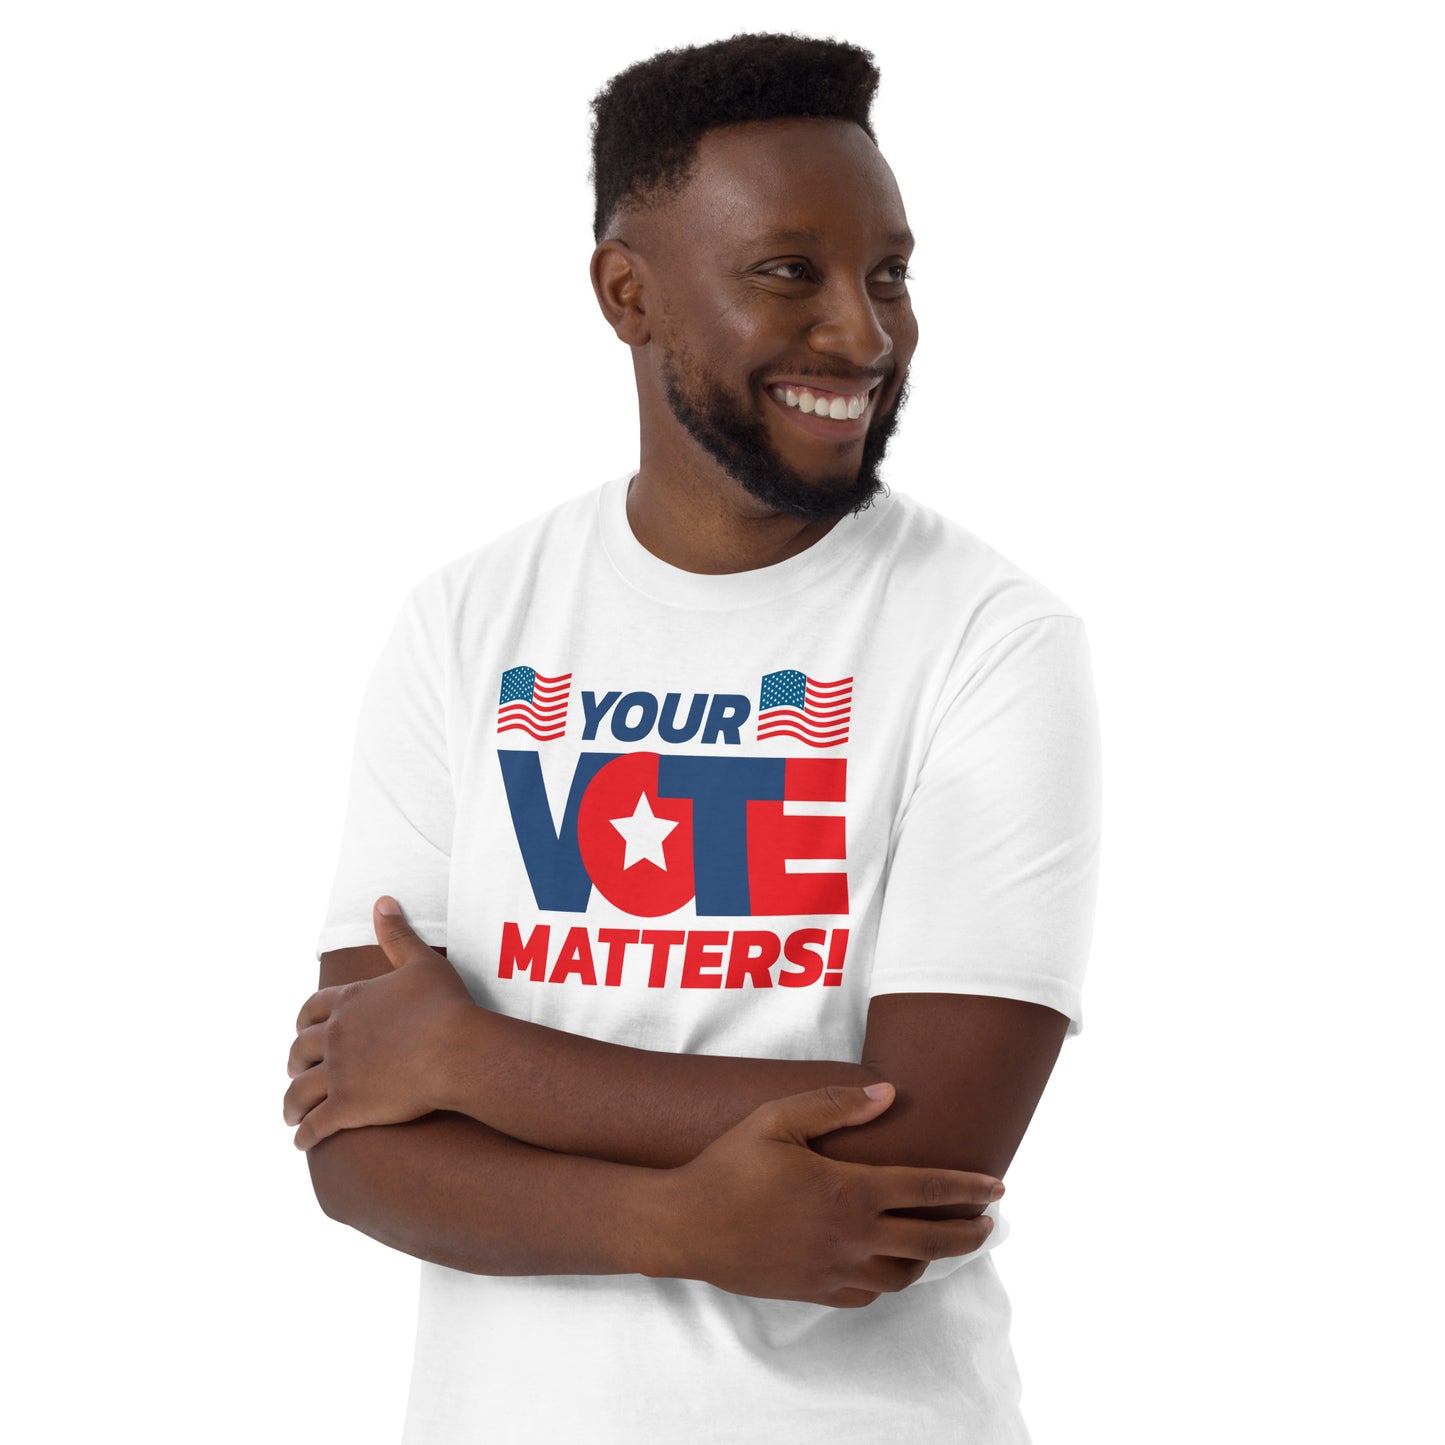 USA-Wahl / Your Vote Matters T-Shirt